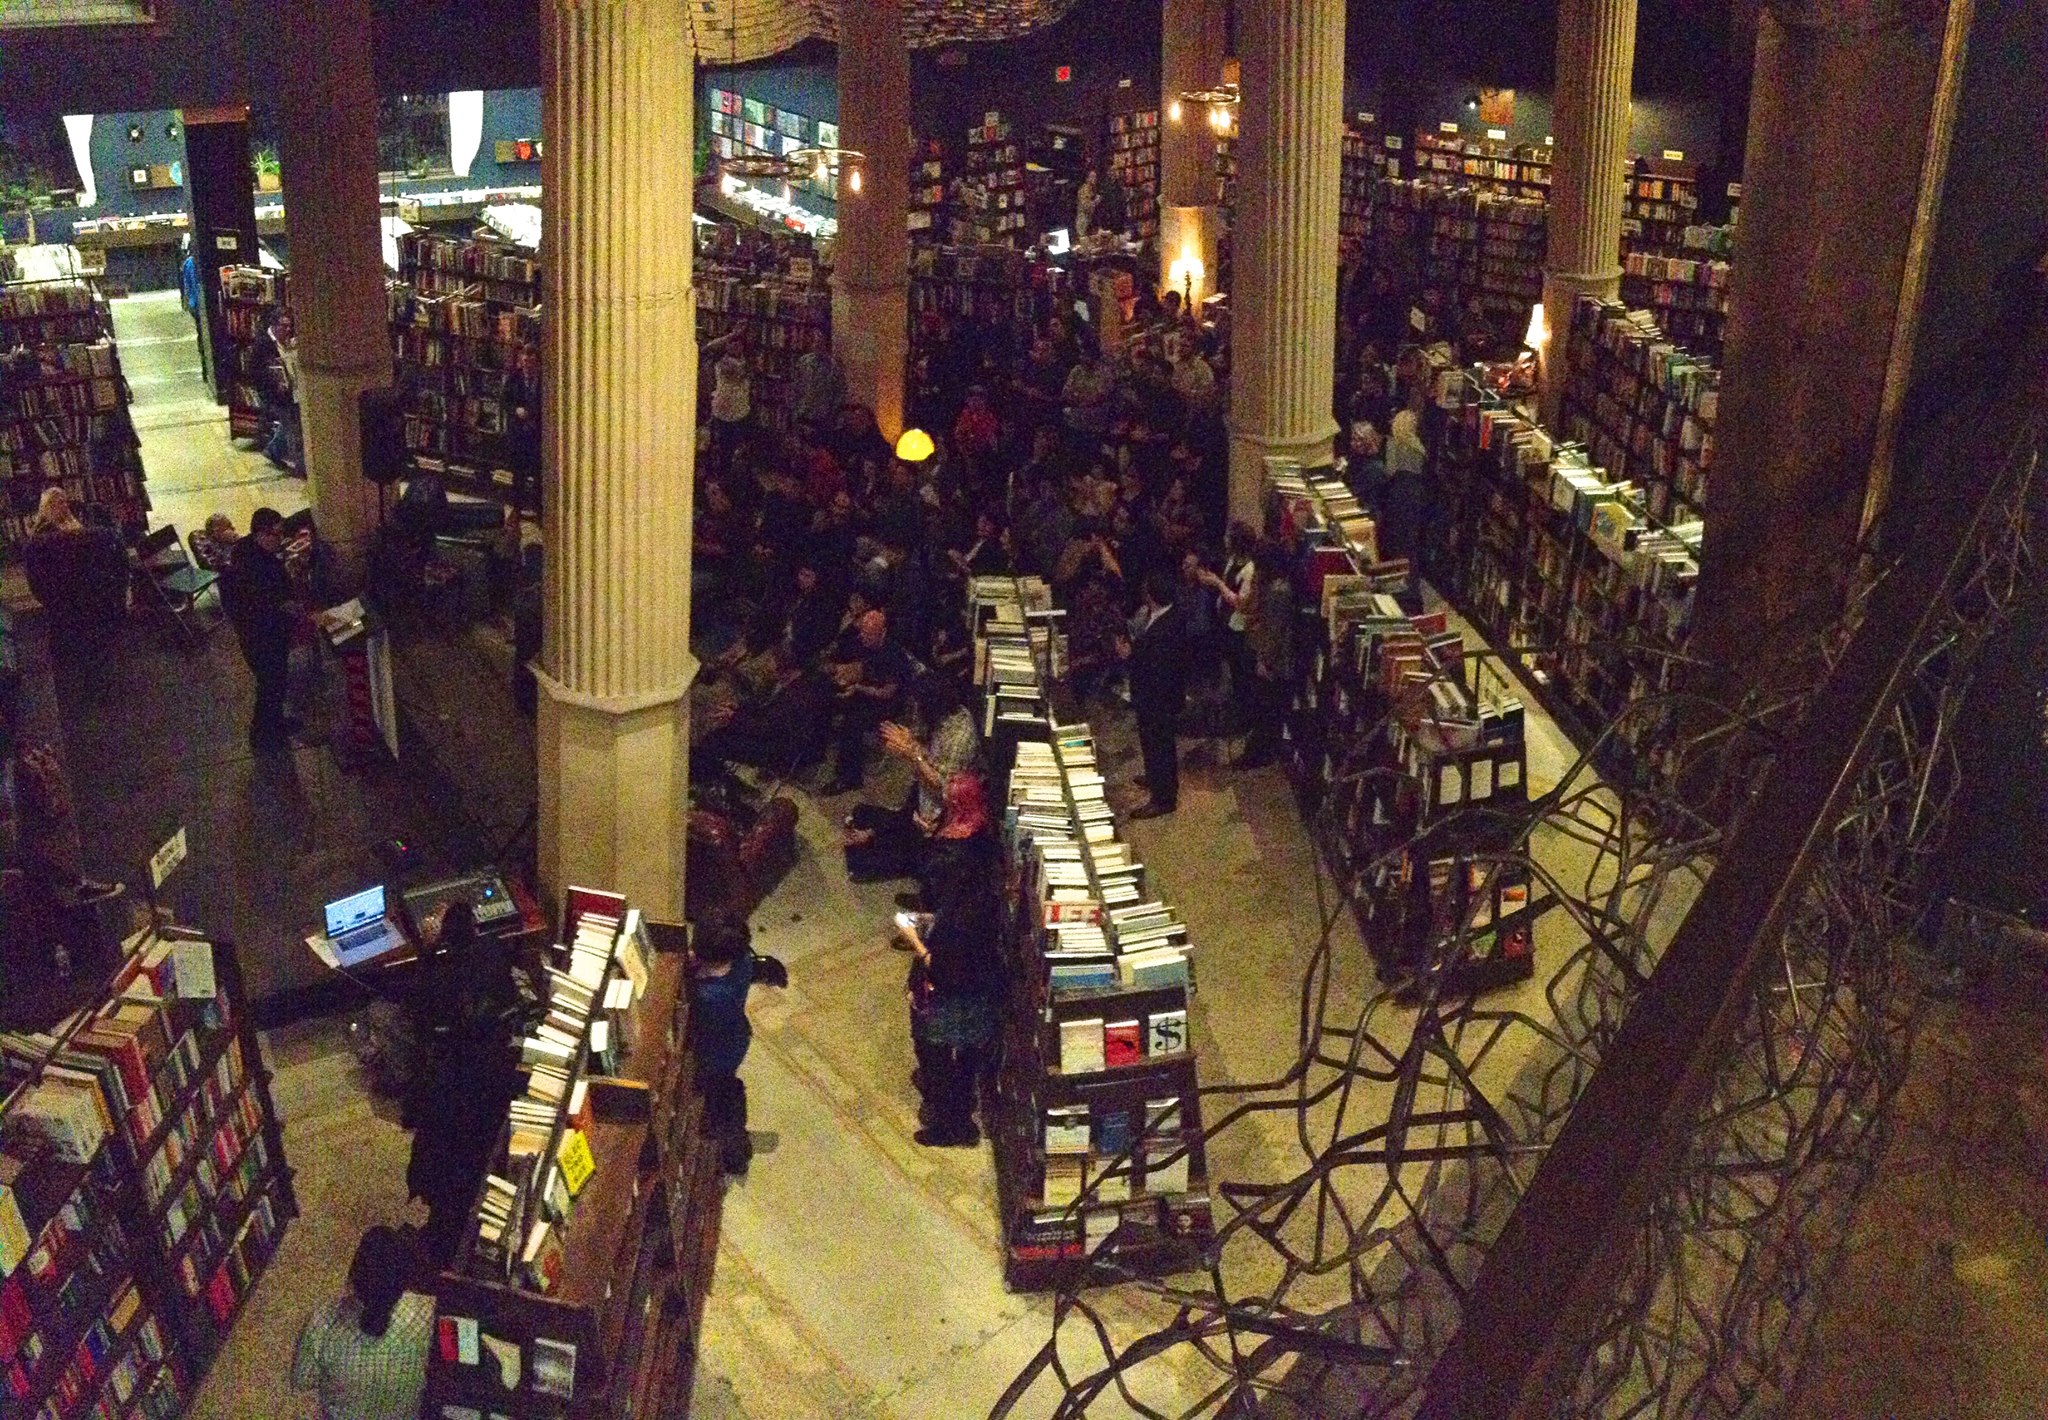 The Last Bookstore from the balcony